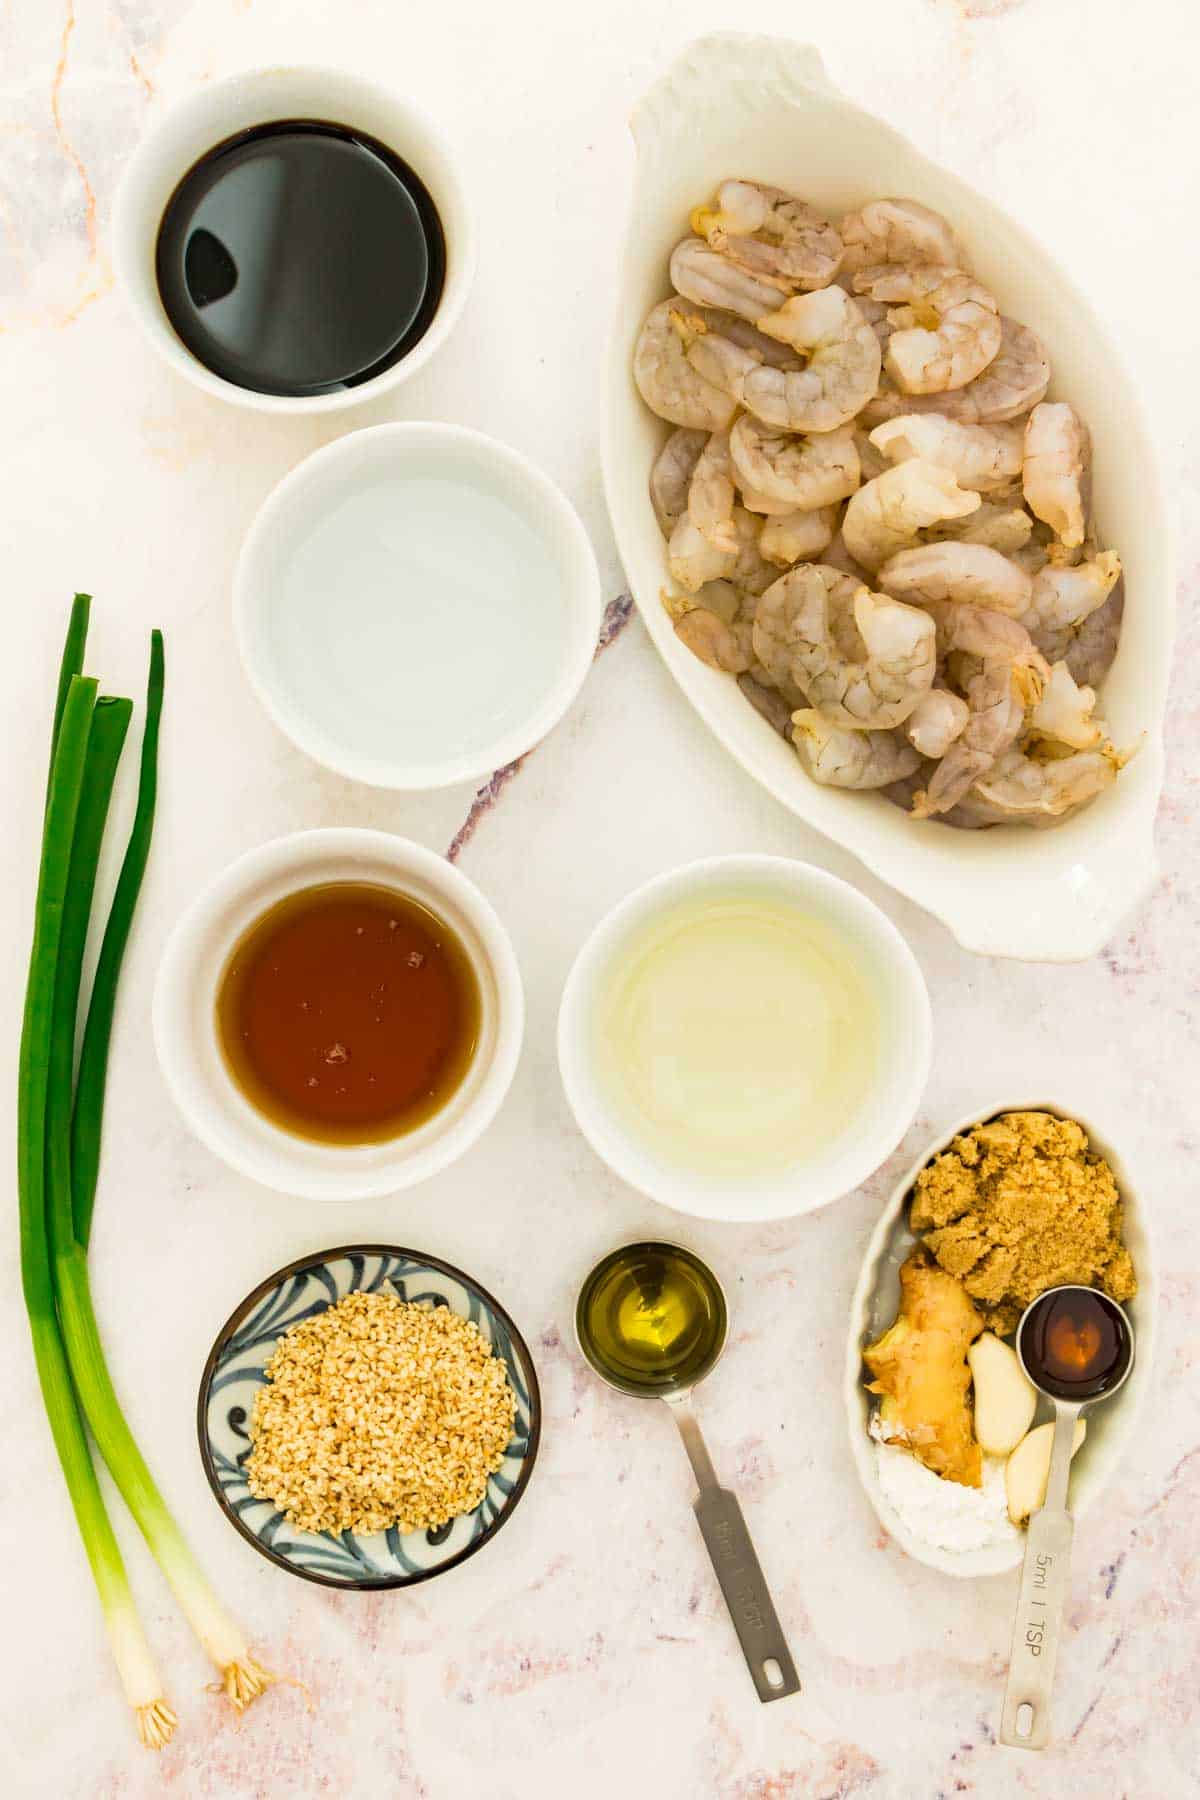 Ingredients for teriyaki shrimp are shown on a white background including shrimp, oil, fresh ginger, soy sauce, green garlic, and garlic.